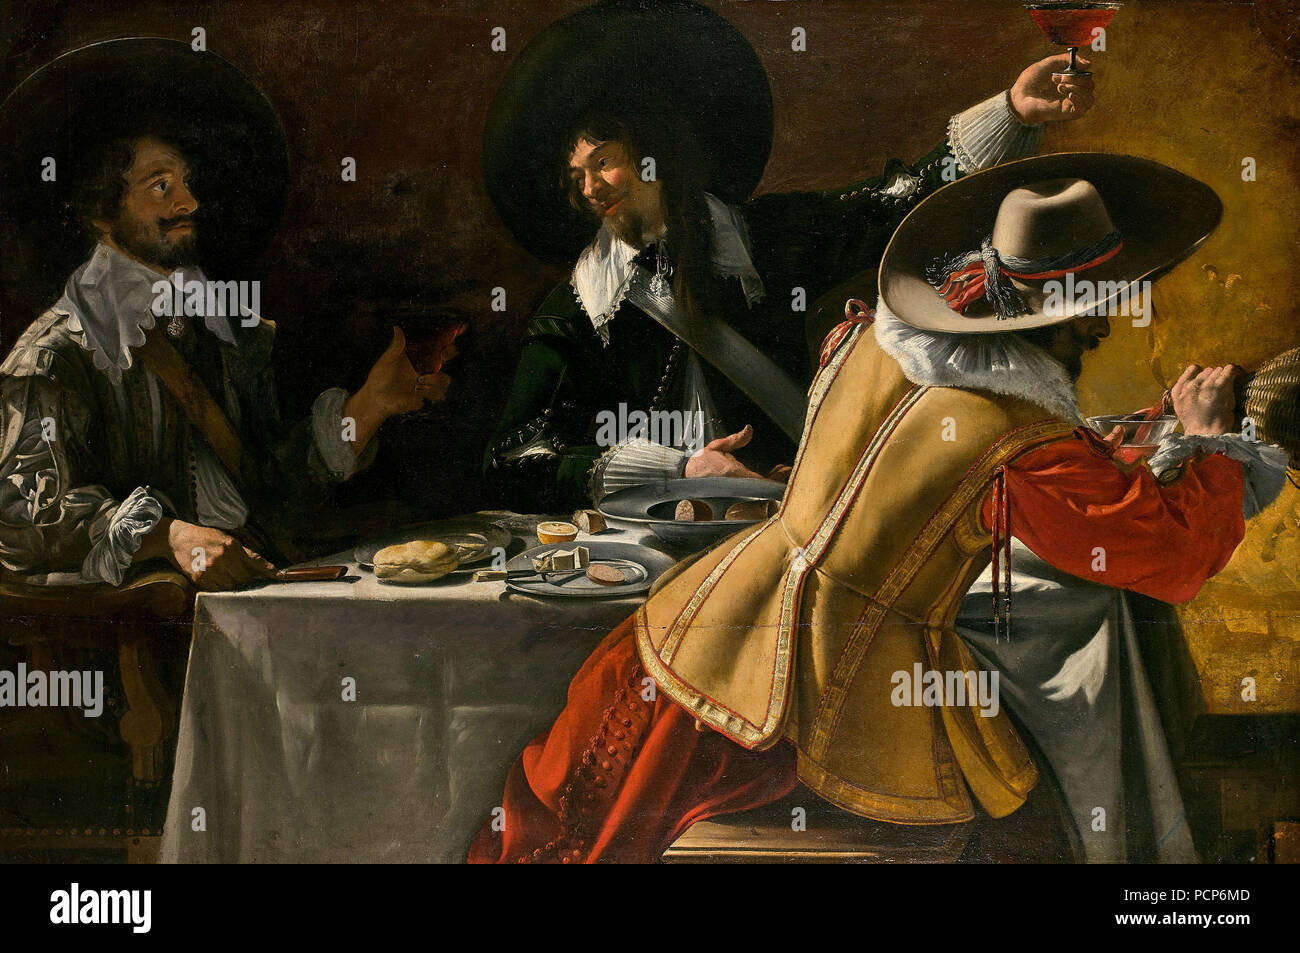 The Three Musketeers sitting at a table, c.1630. Stock Photo